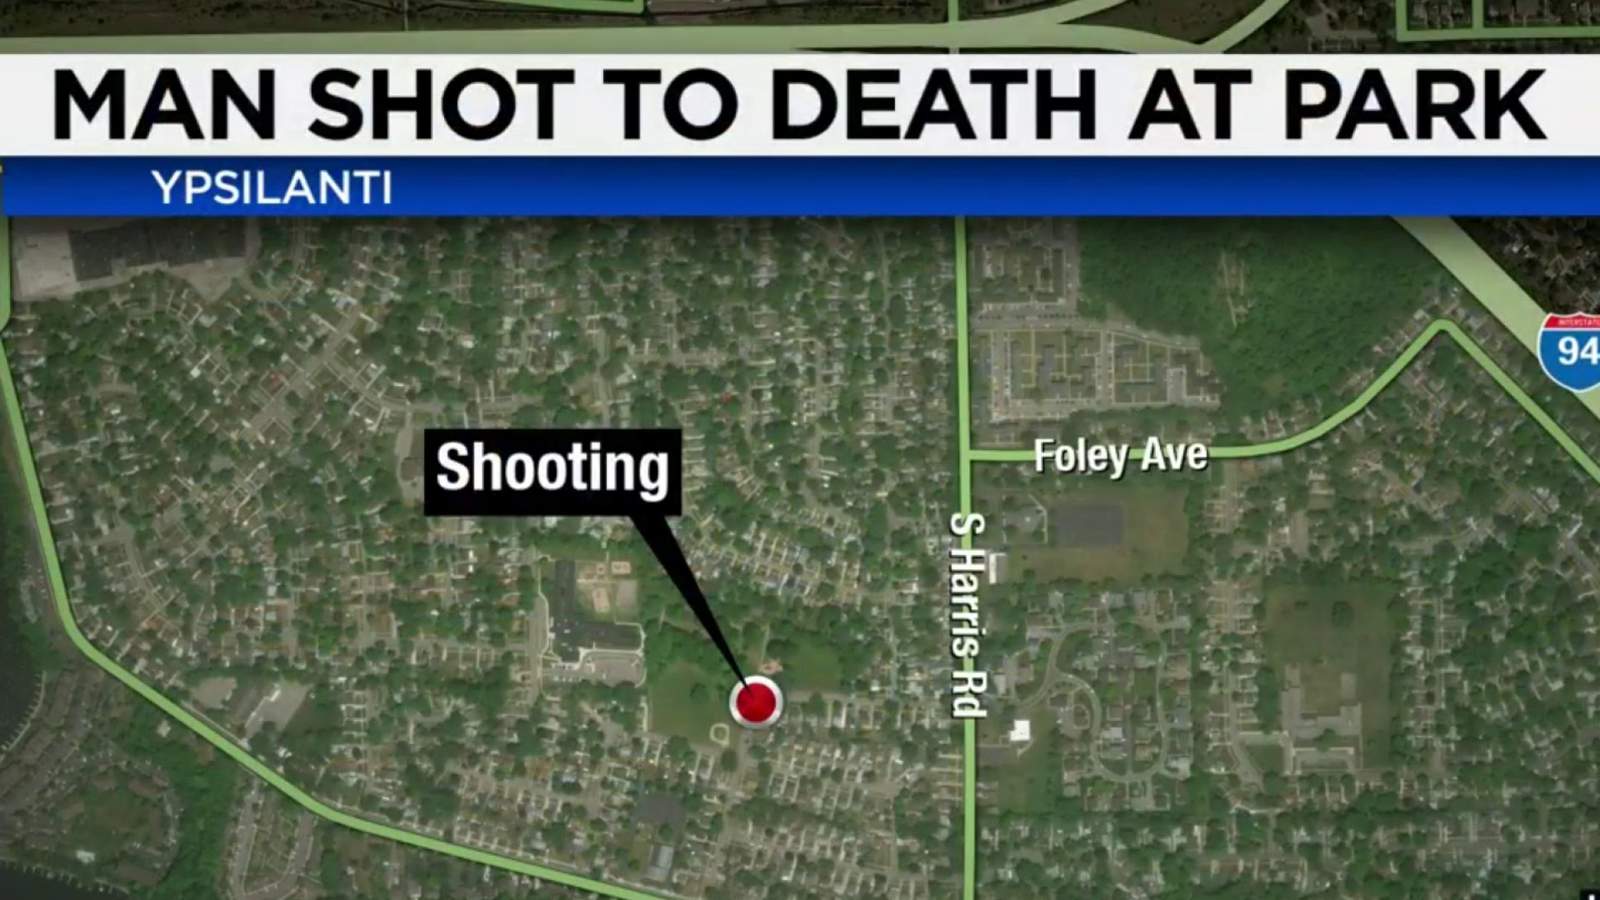 21-year-old killed at Ypsilanti park, search for killer continues